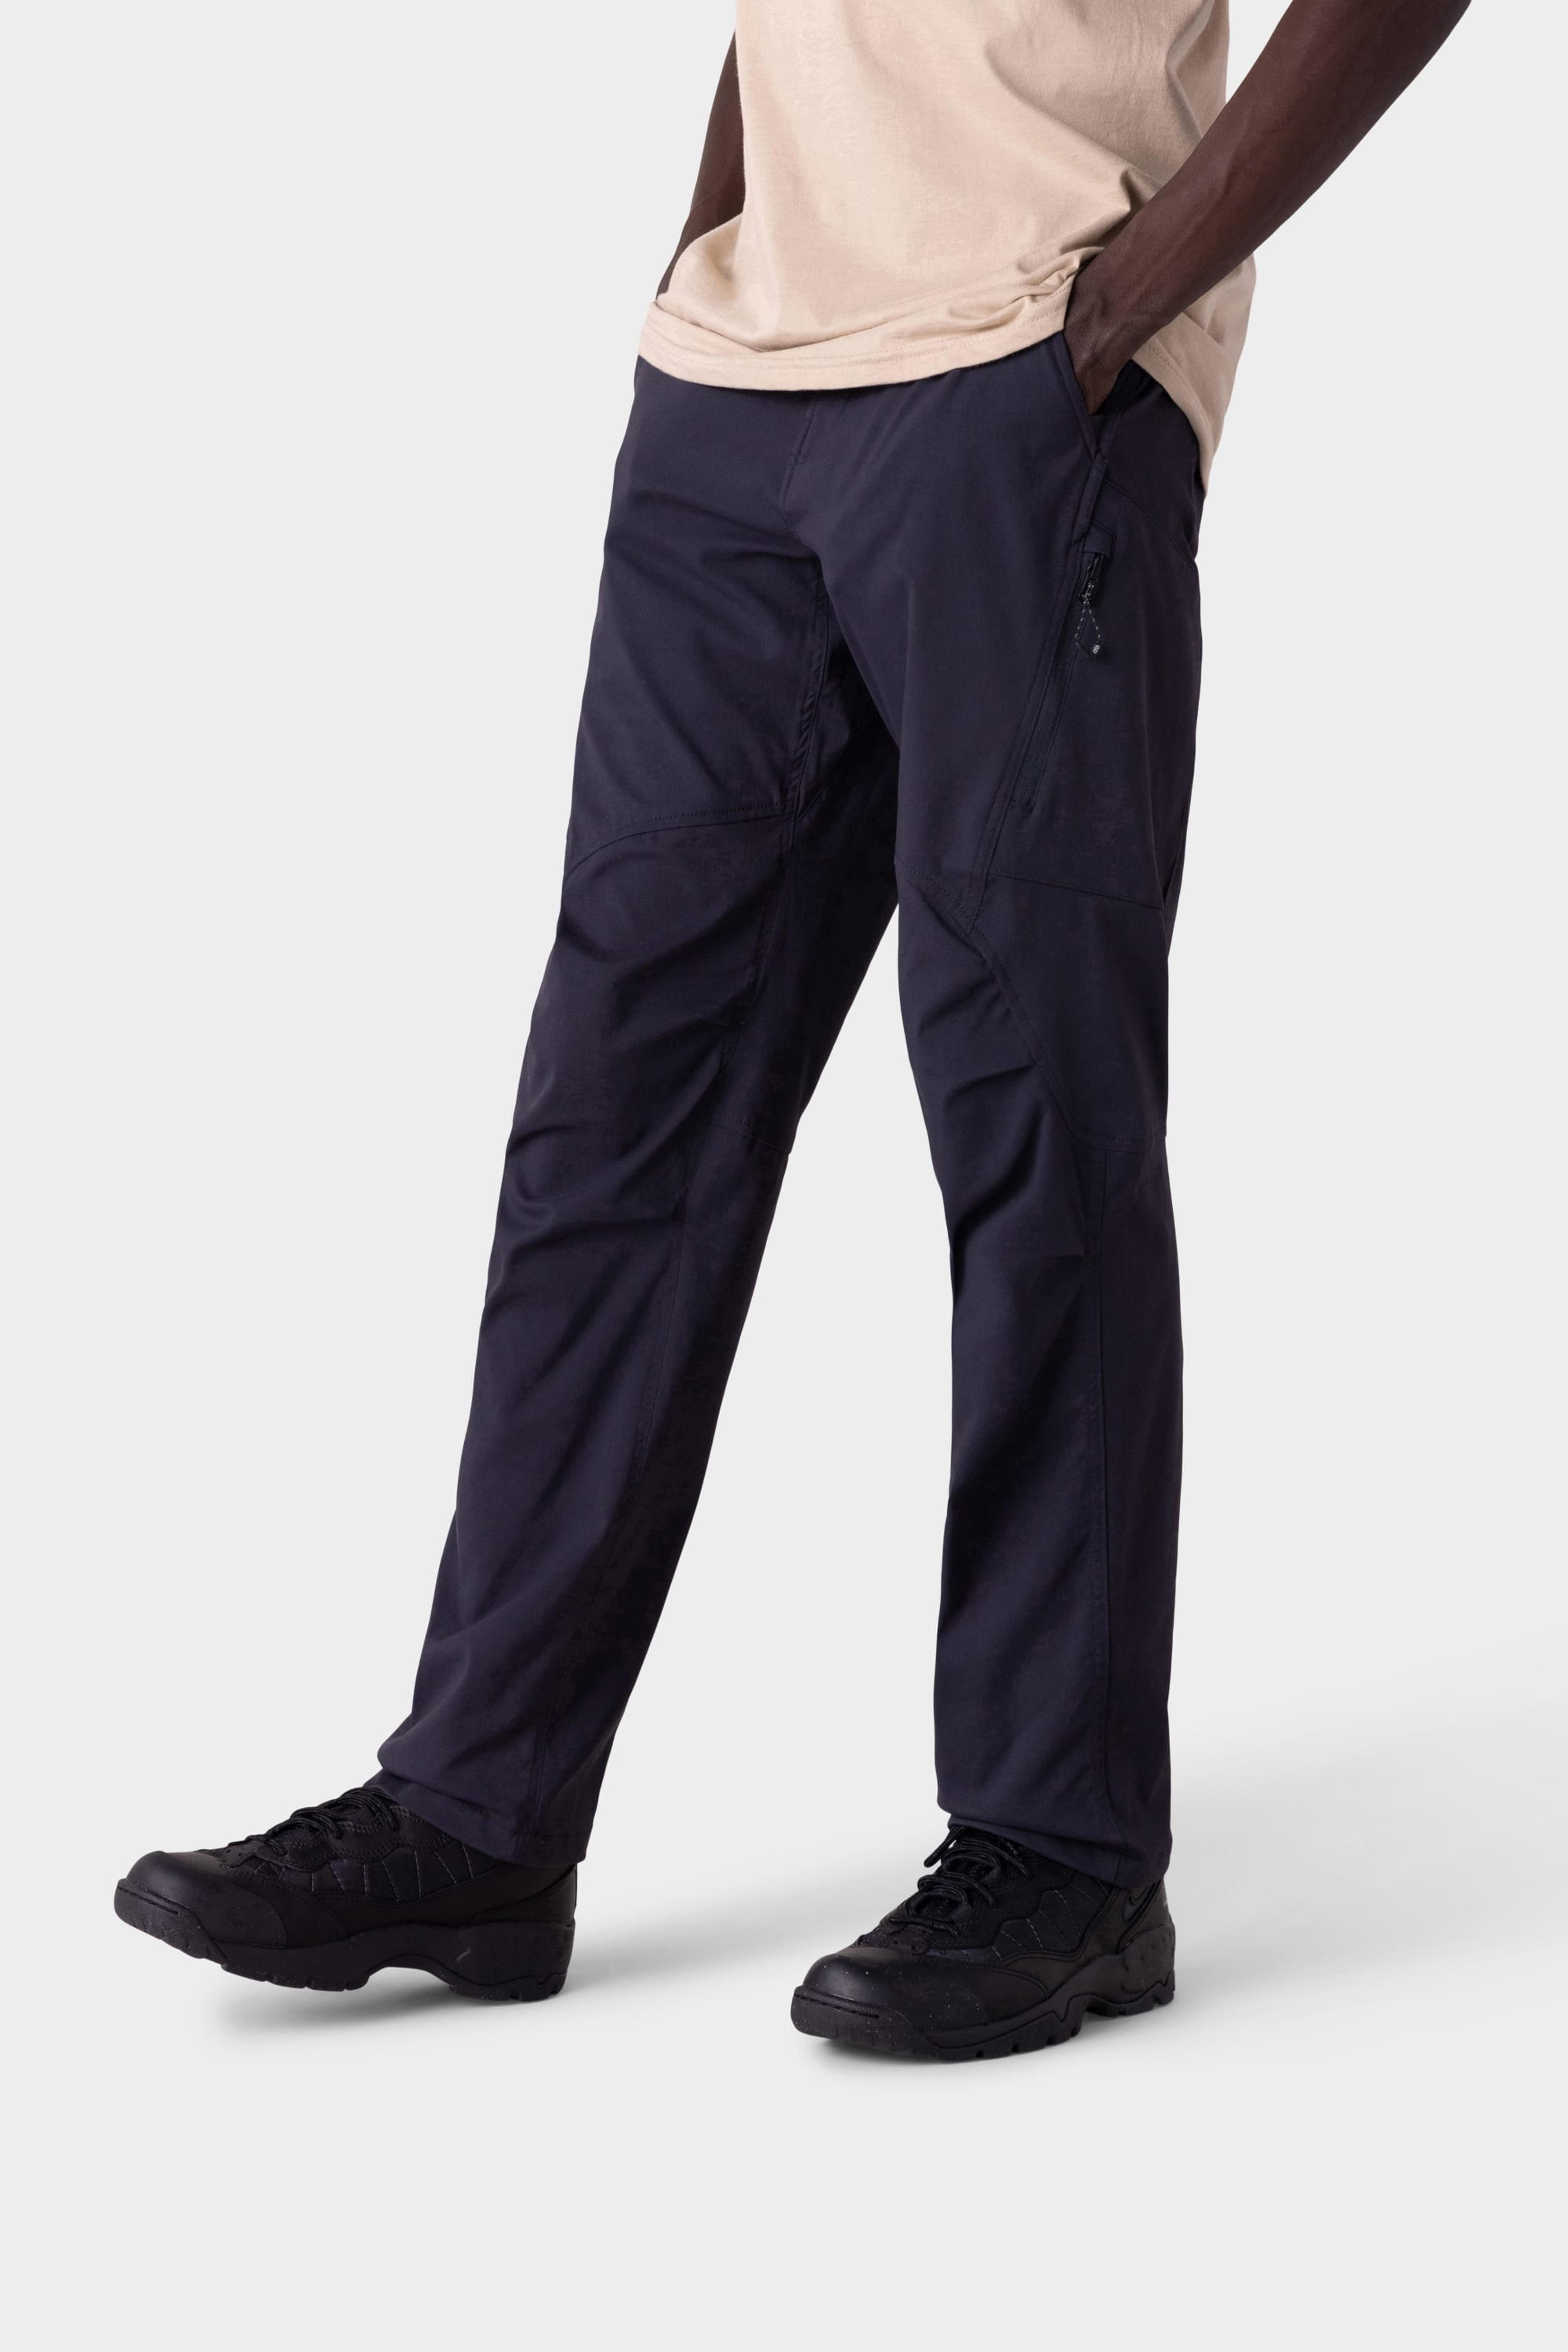 Alternate View 45 of 686 Men's Anything Cargo Pant - Relaxed Fit